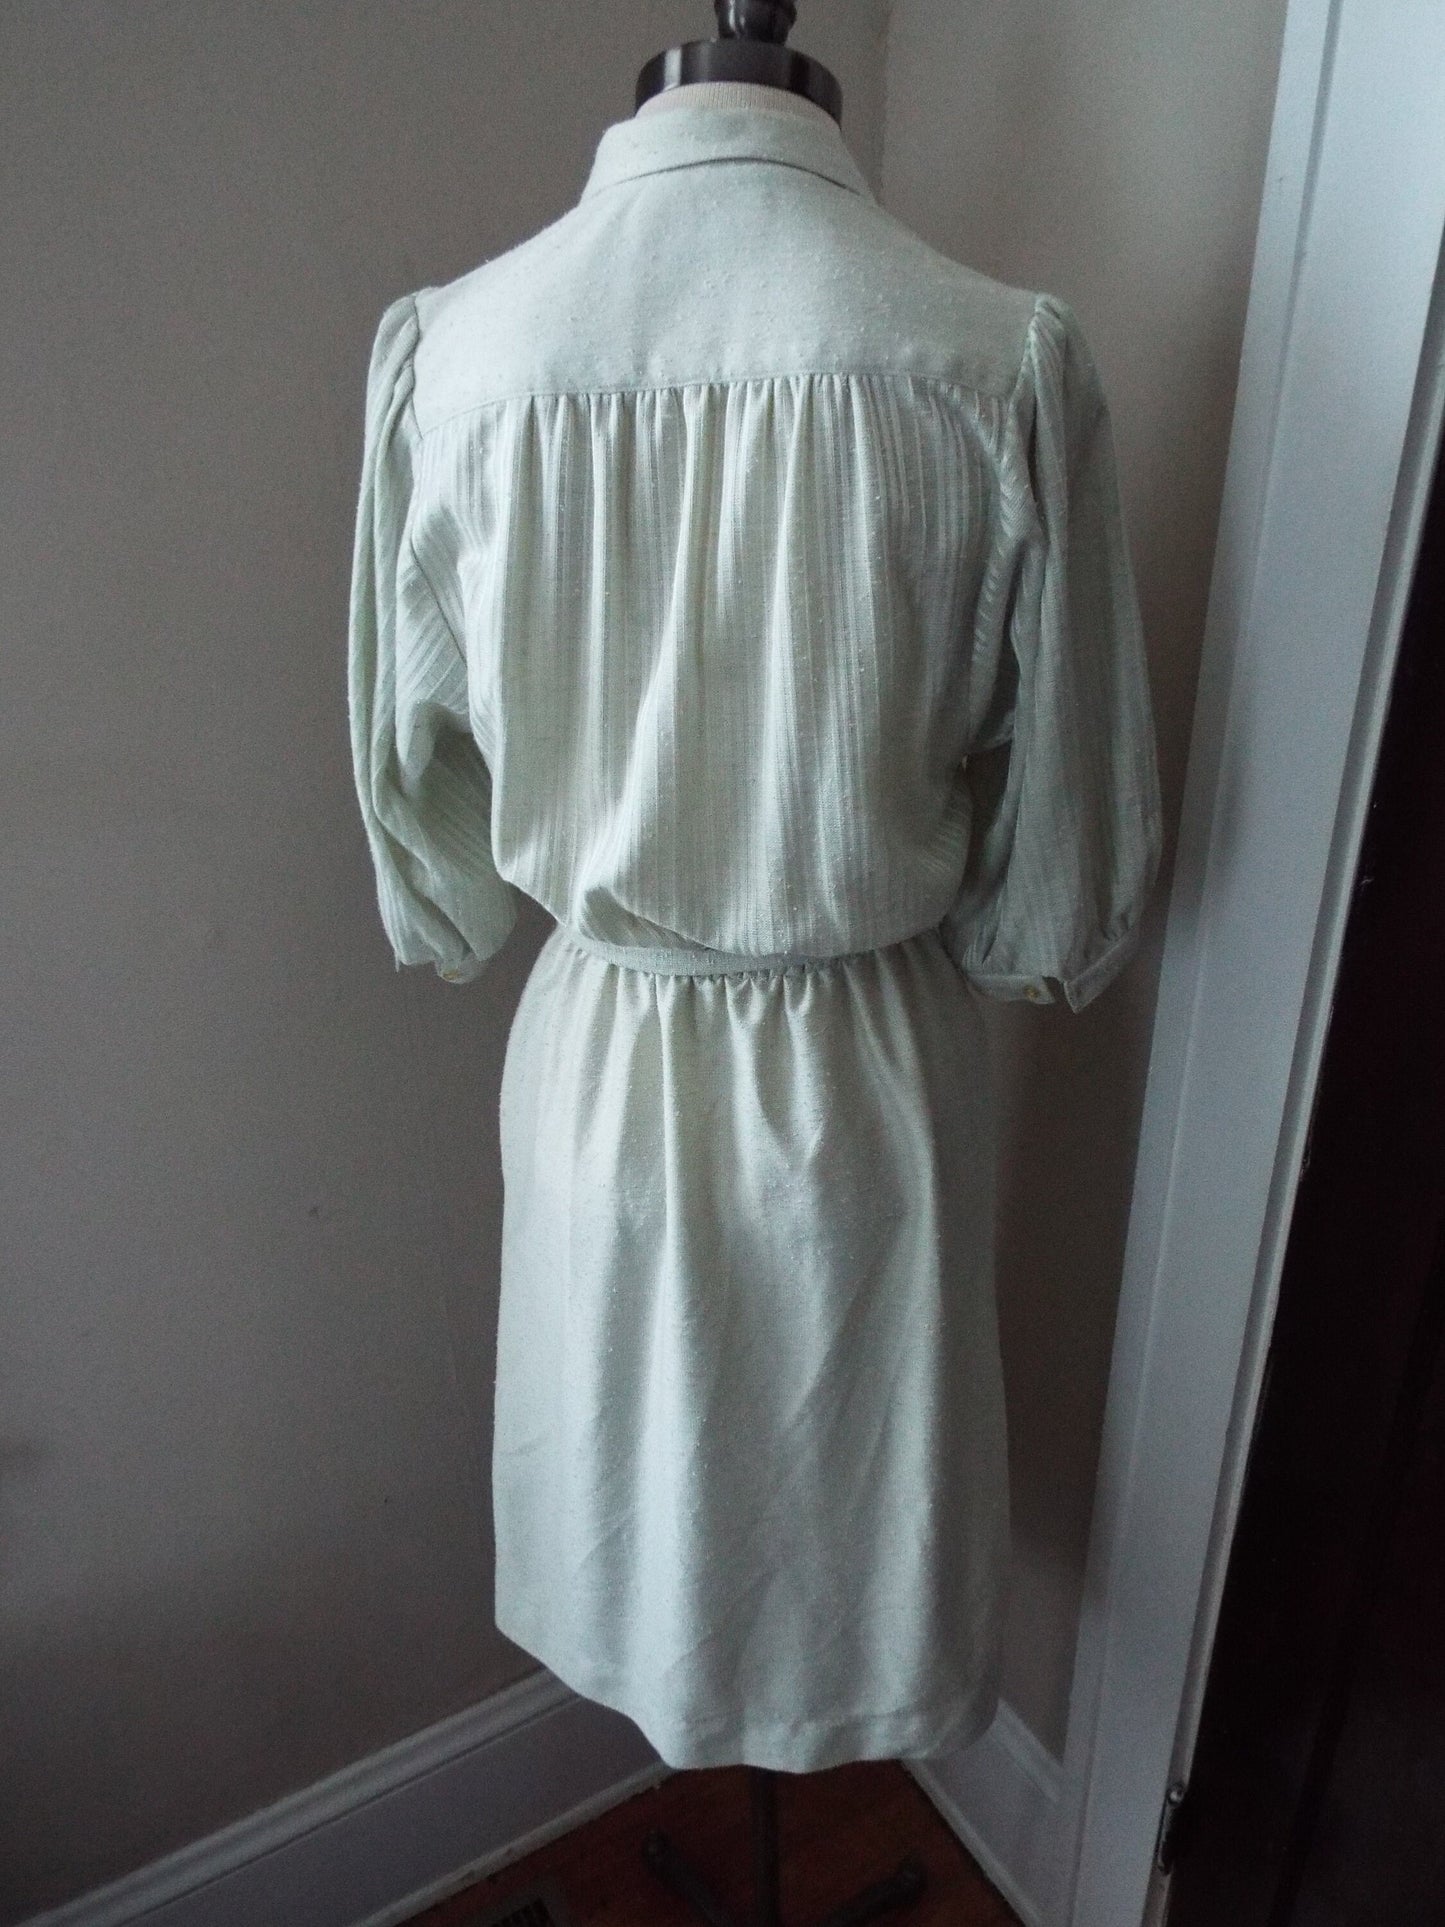 Vintage Short Sleeve Dress by Ann Hobbs for Connections